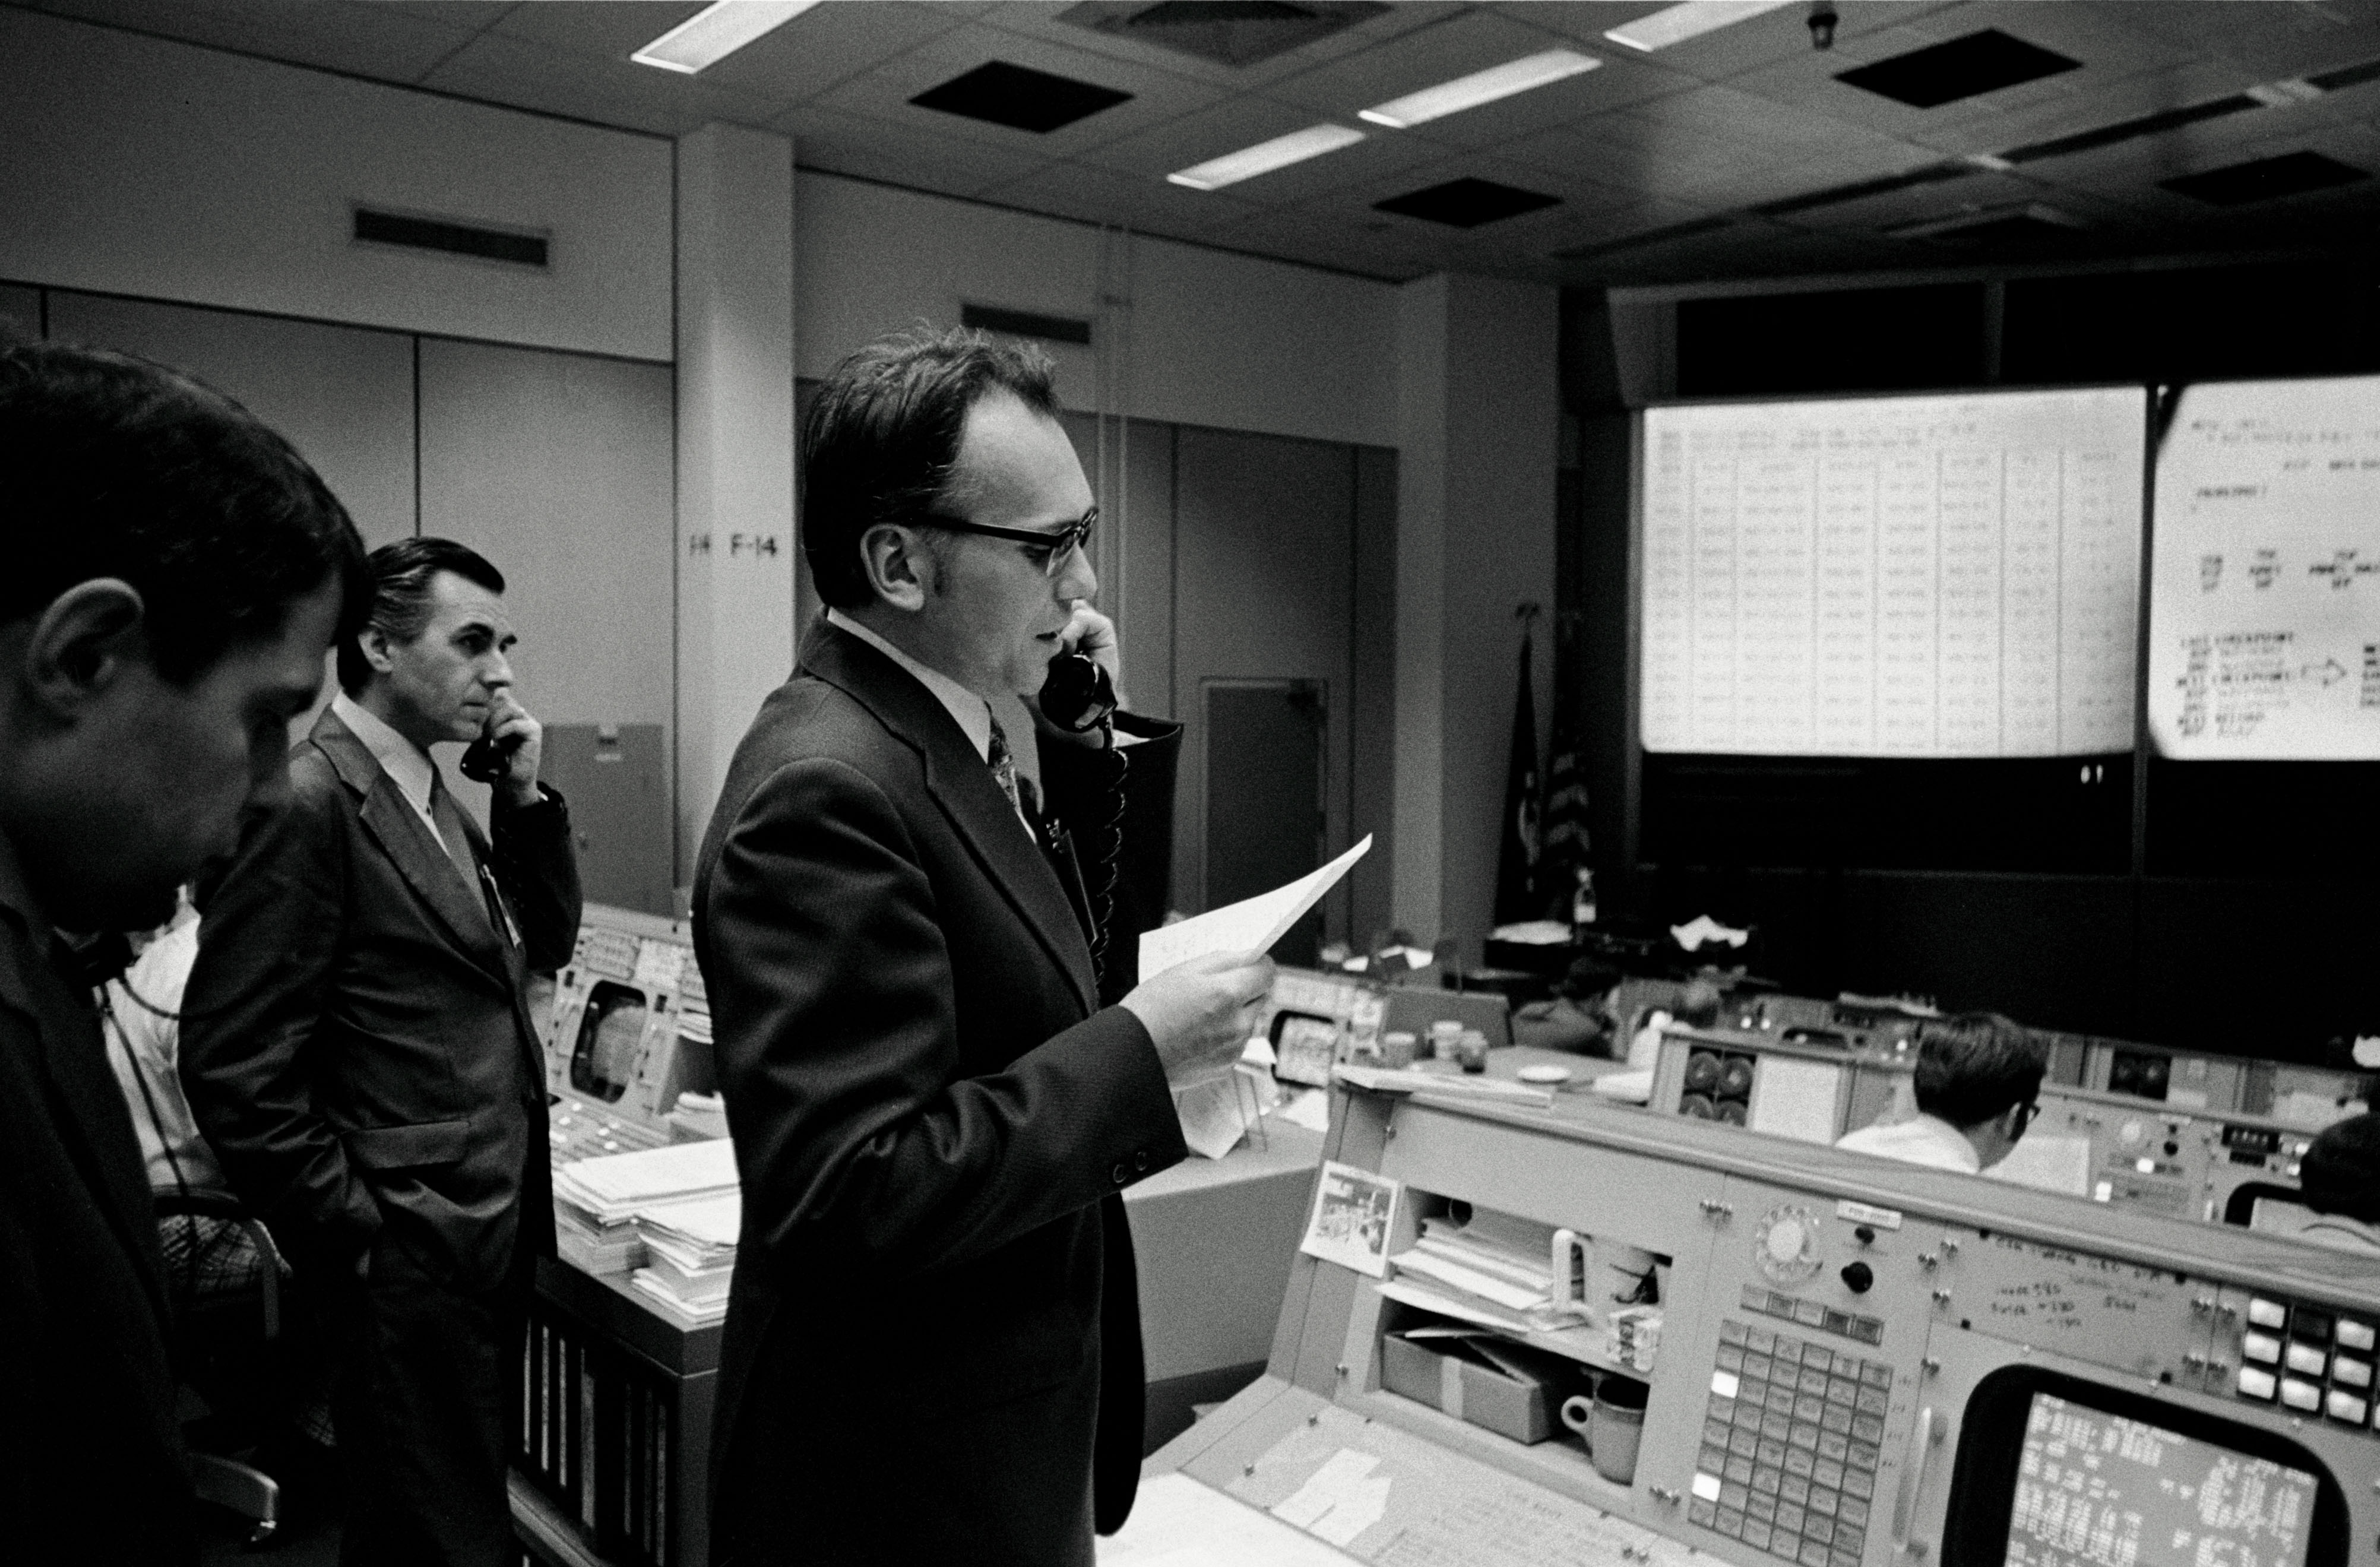 In the Mission Control Center at NASA’s Johnson Space Center in Houston, Professor Luboš Kohoutek talks with the Skylab 4 crew